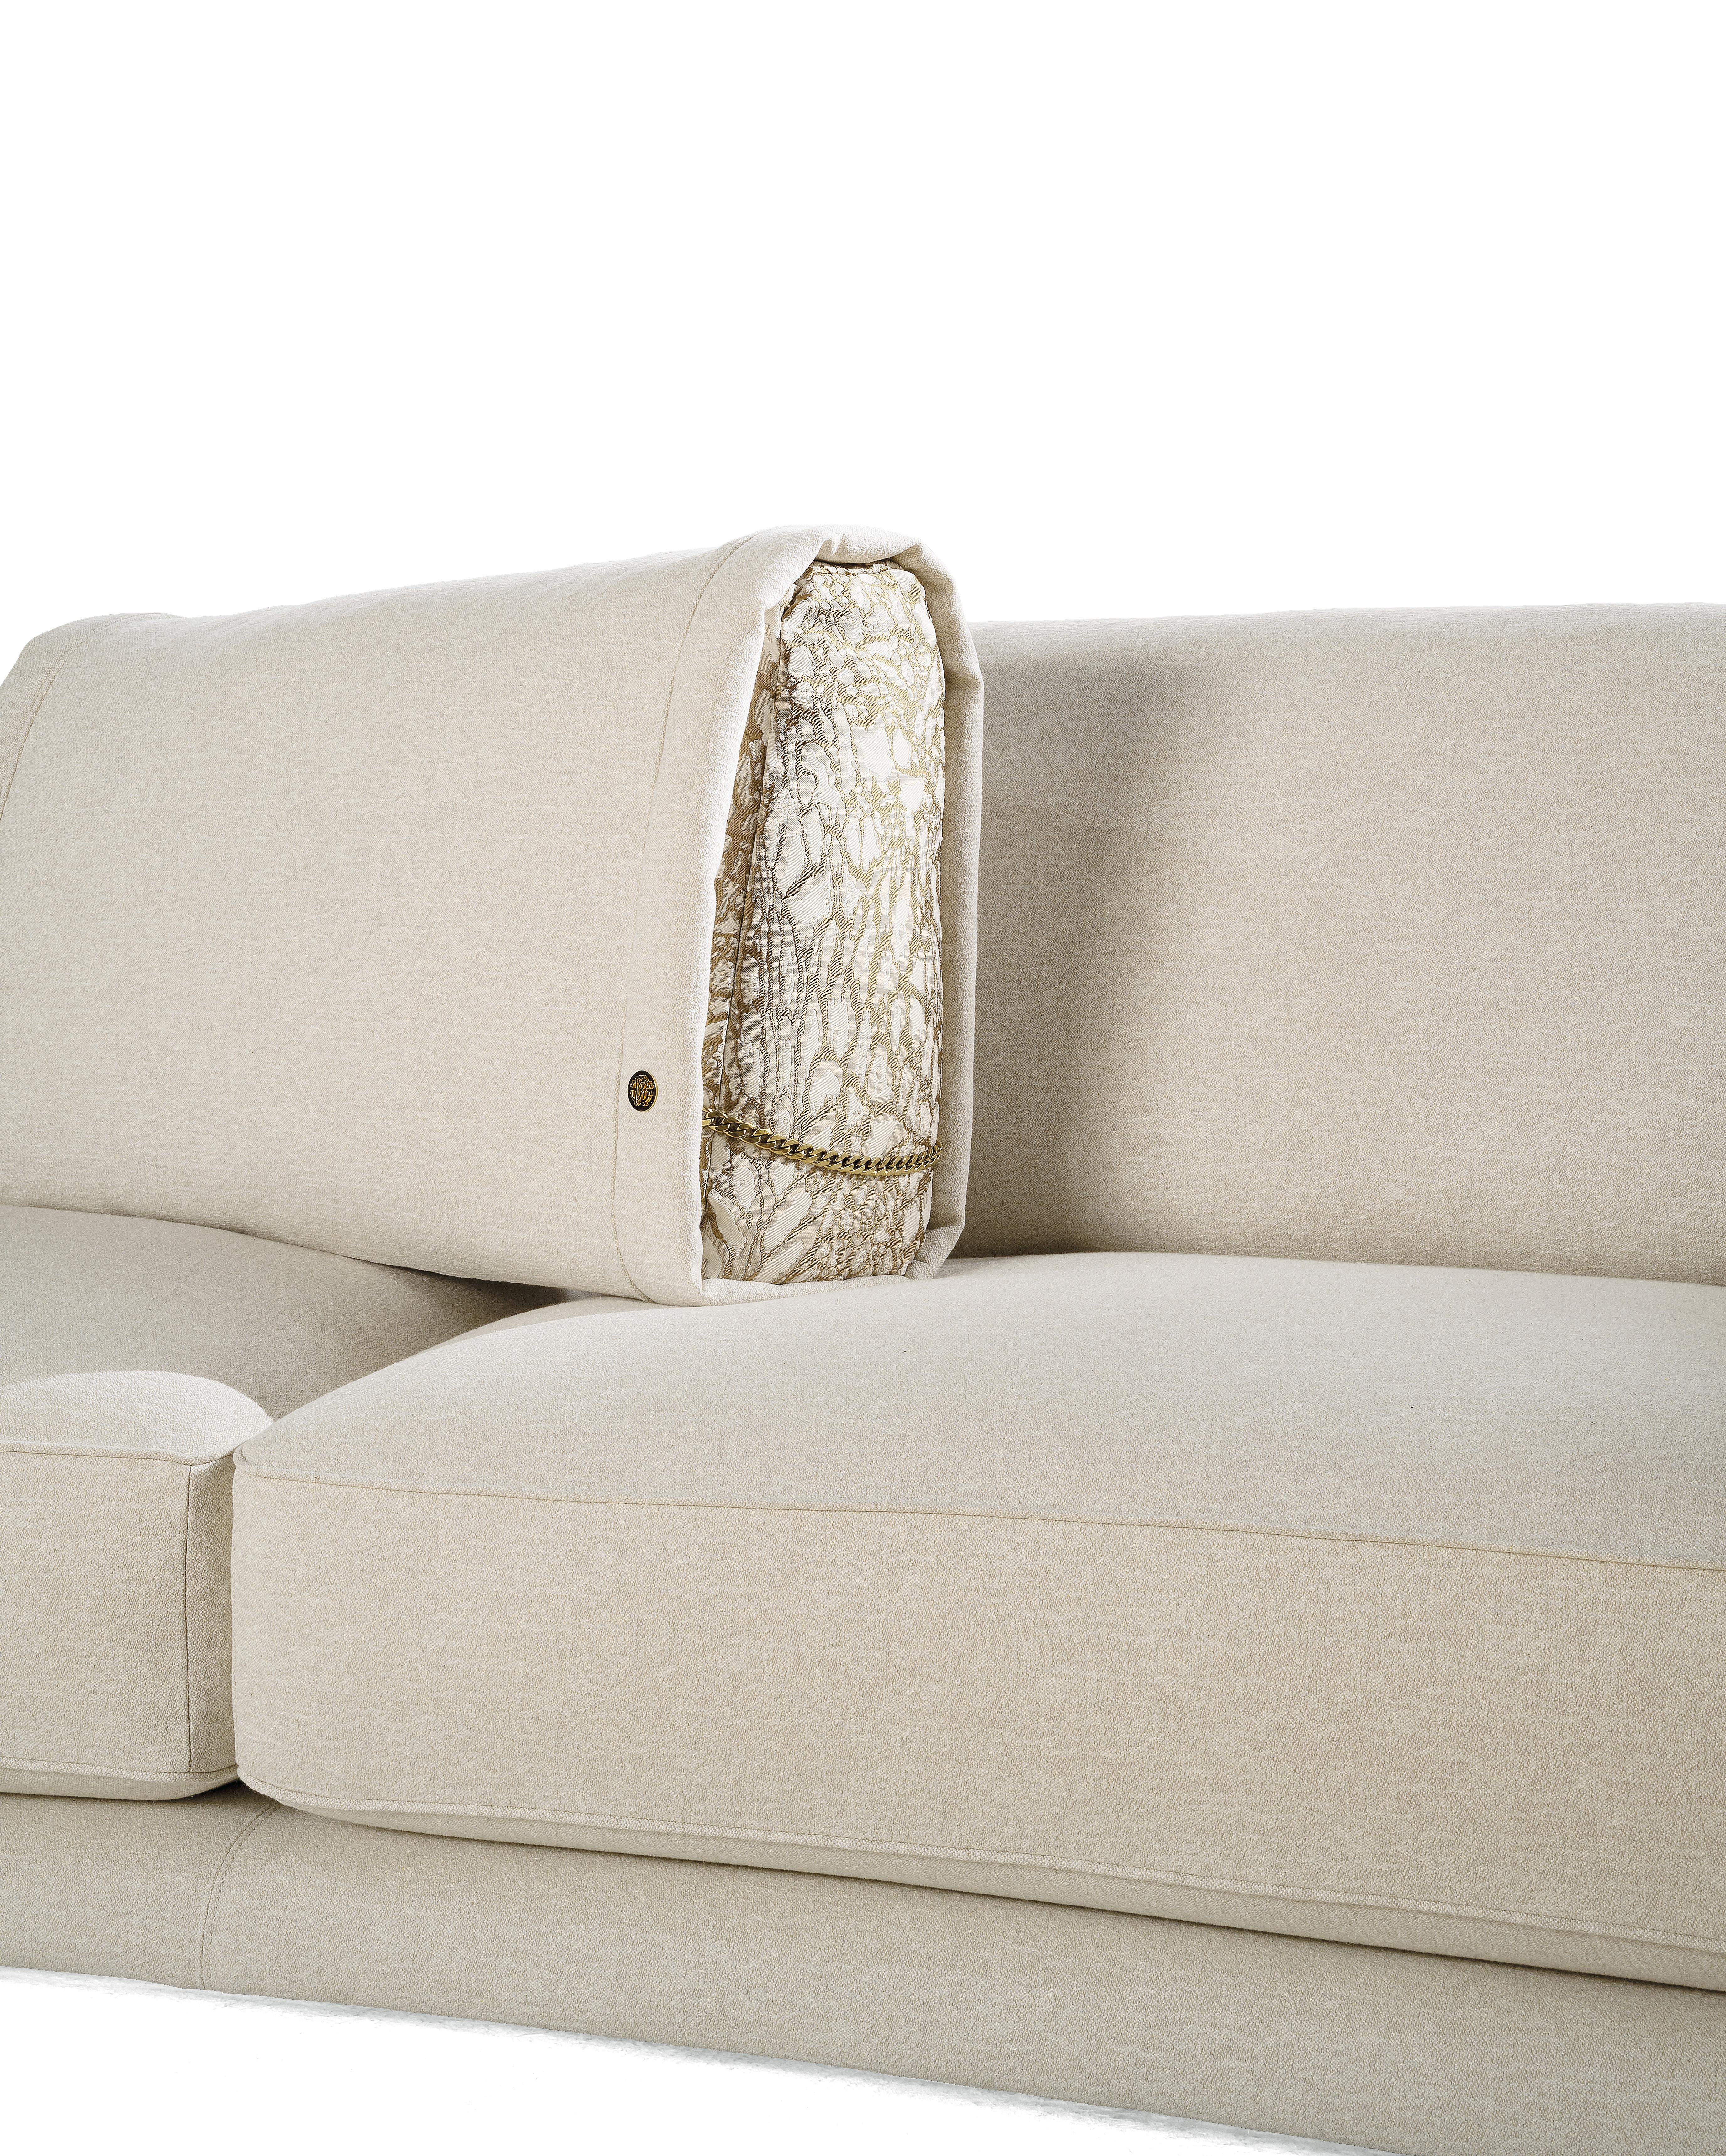 21st Century Smoking 2 Sofa in Fabric by Roberto Cavalli Home Interiors In New Condition For Sale In Cantù, Lombardia